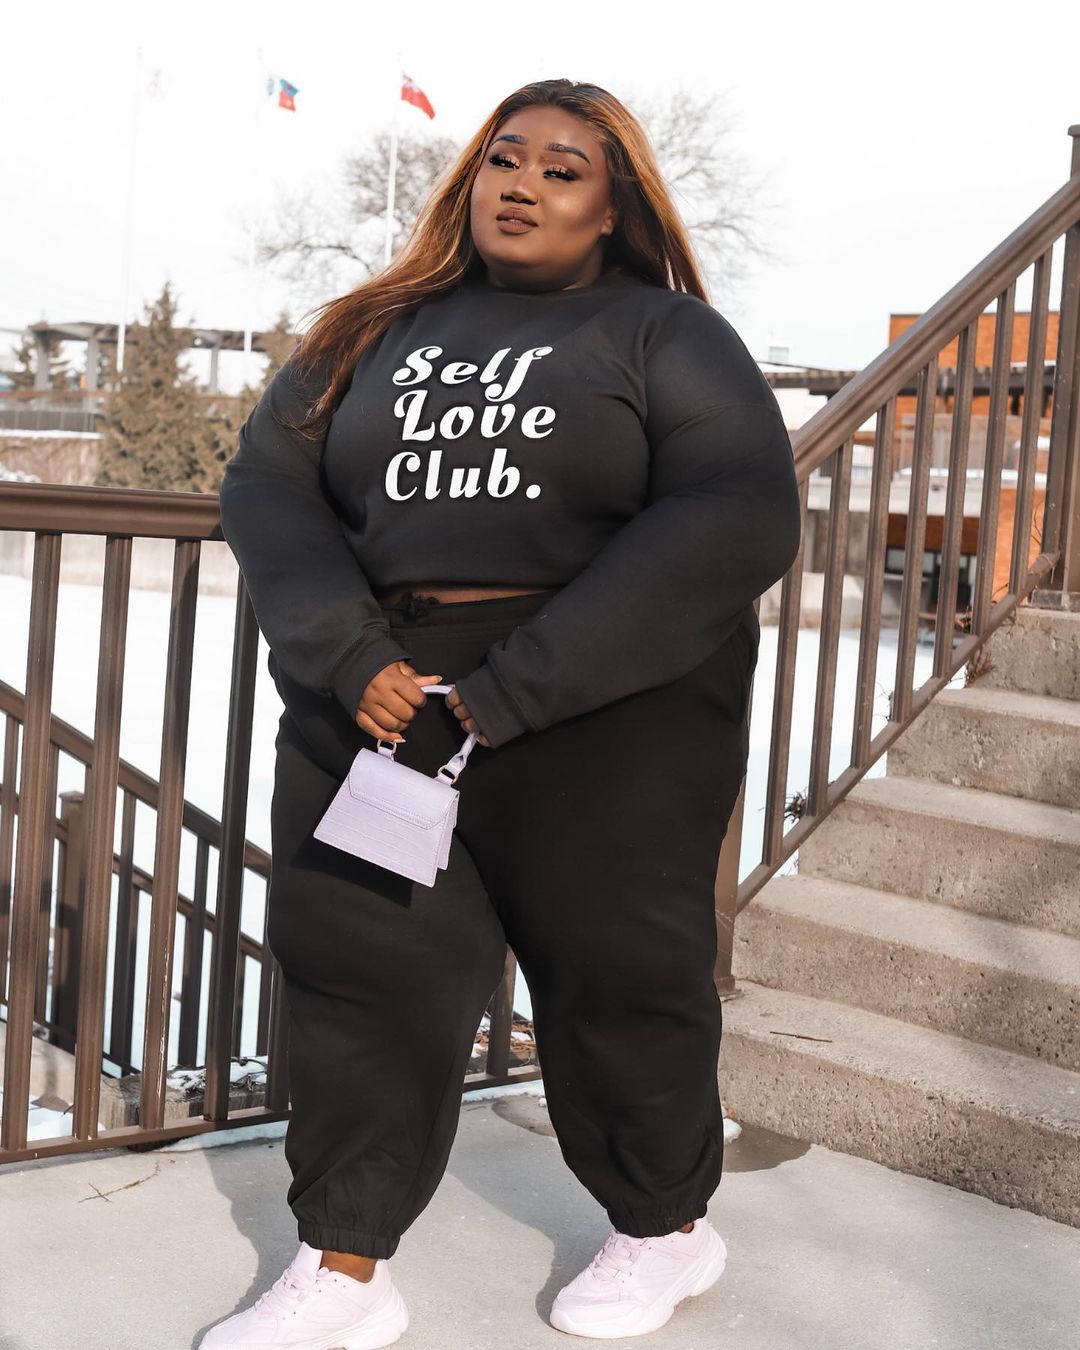 Louange.m posing by a stairway, wearing black sweatpants, a sweatshirt with "Self Love Club" written on the chest. She is holding a white mini bag and wearing white sneakers. Size 24 + model.